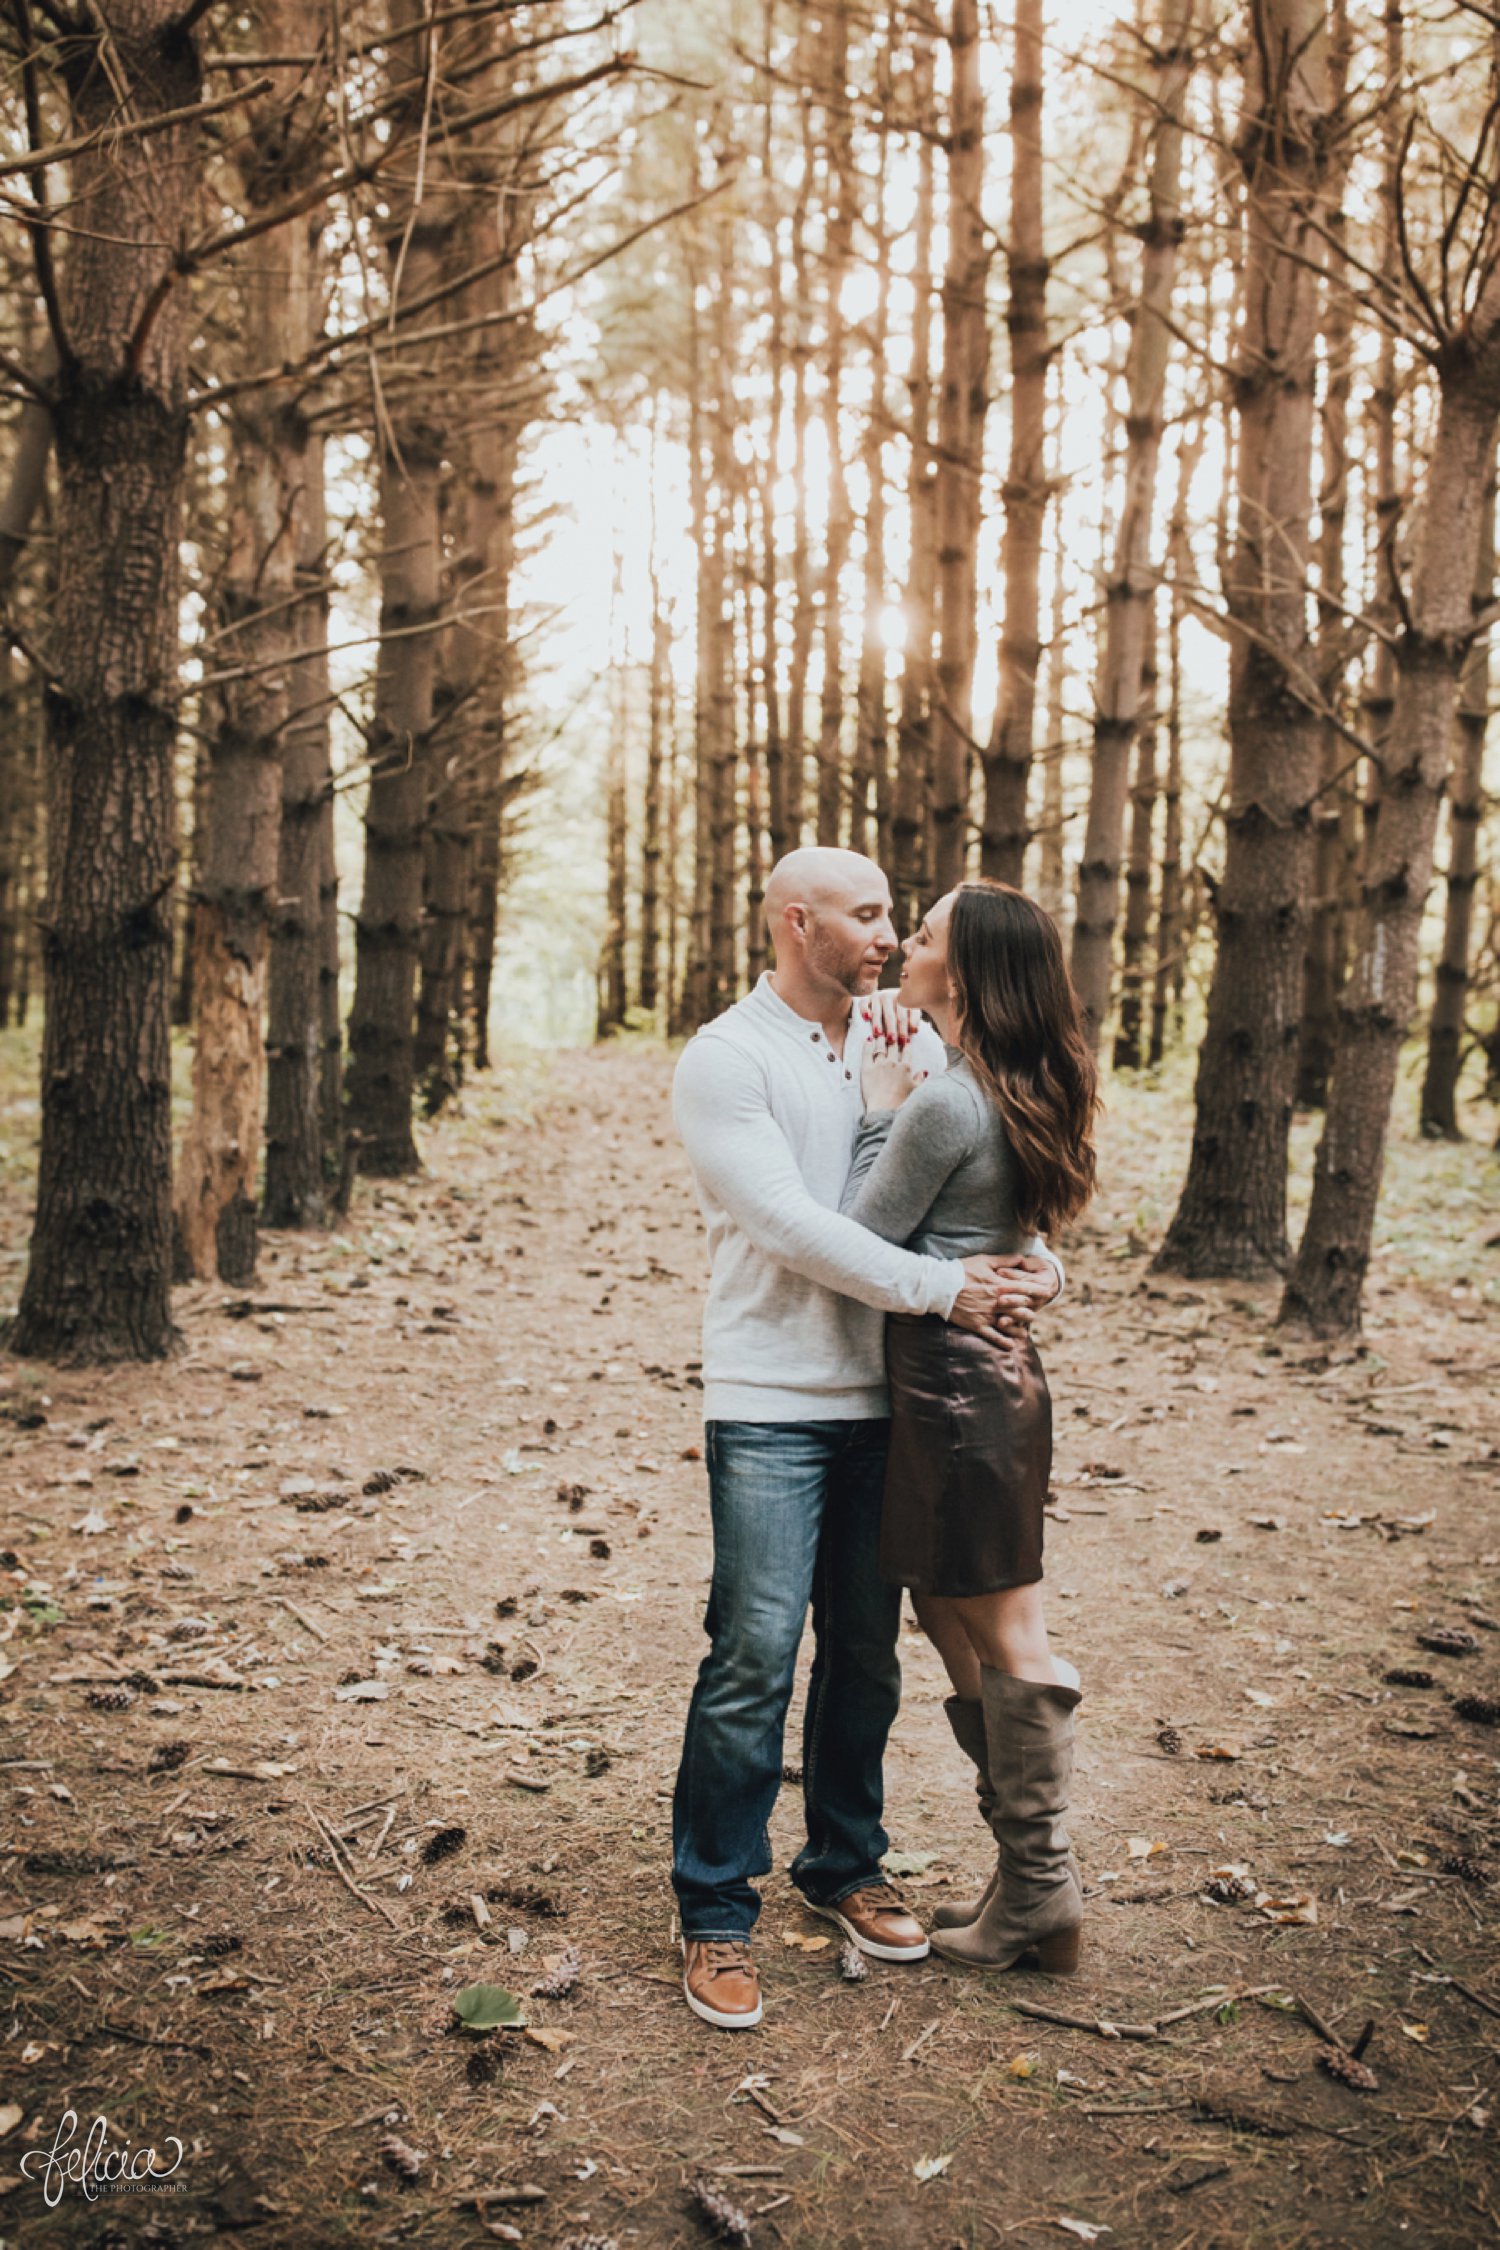 images by feliciathephotographer.com | destination wedding photographer | family portraits | fall attire | autumn | woodland setting | forest | casual | jeans | corduroy | sparkly boots | fur vest | toddlers | hipster | playful | parents and kiddos | father mother | lumber | kiss | couple | 